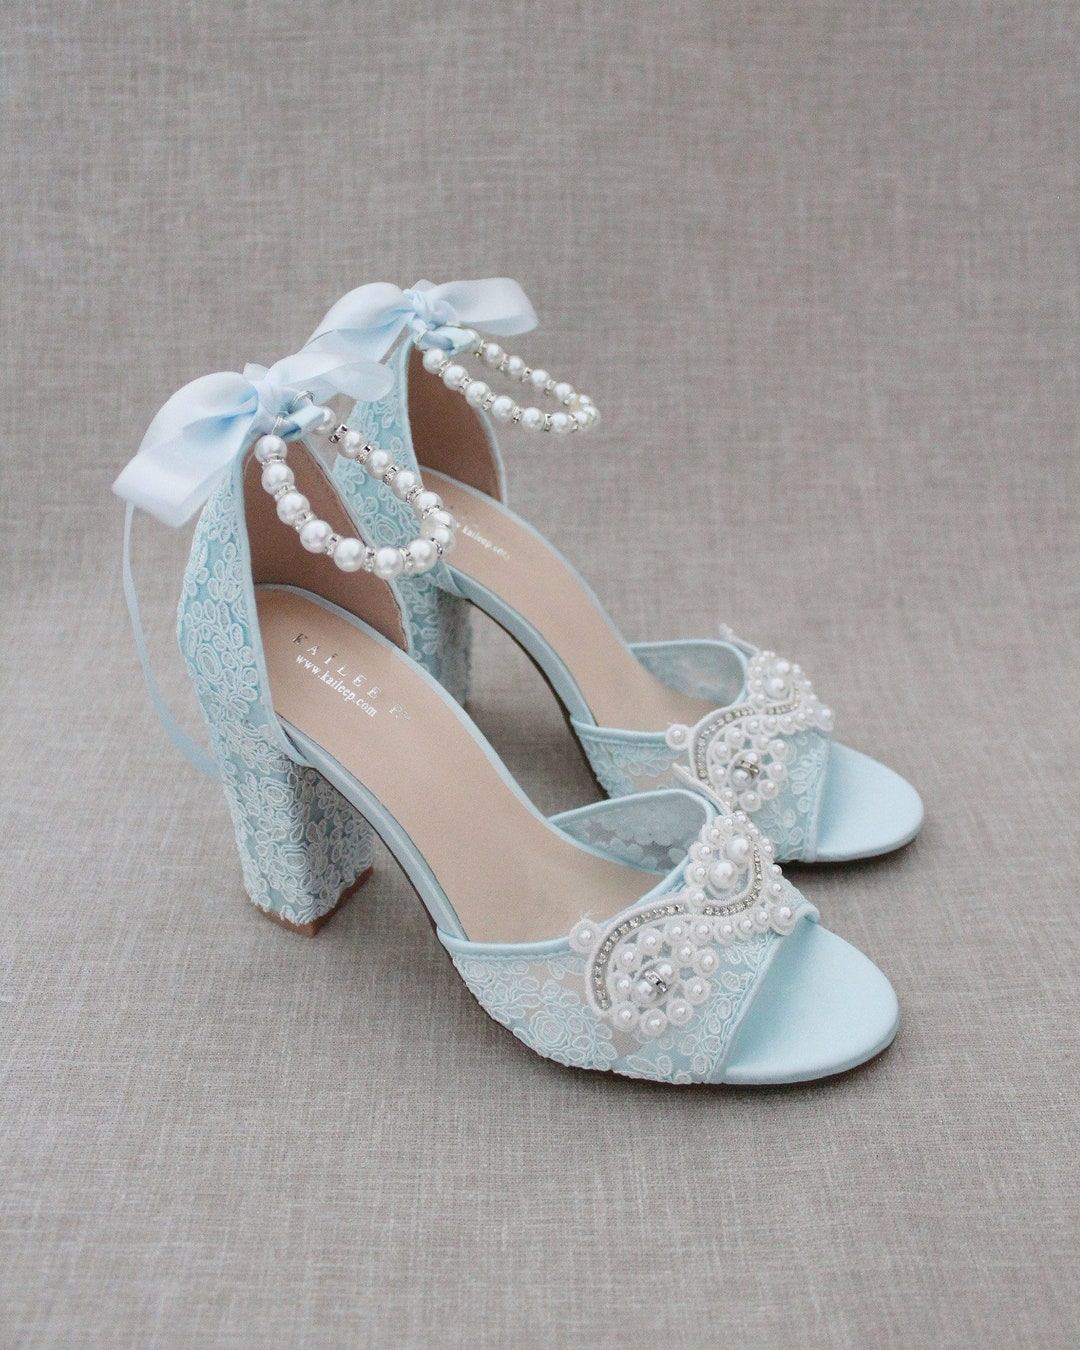 Light Blue Crochet Lace Block Heel Sandals With Small Pearl Applique ...